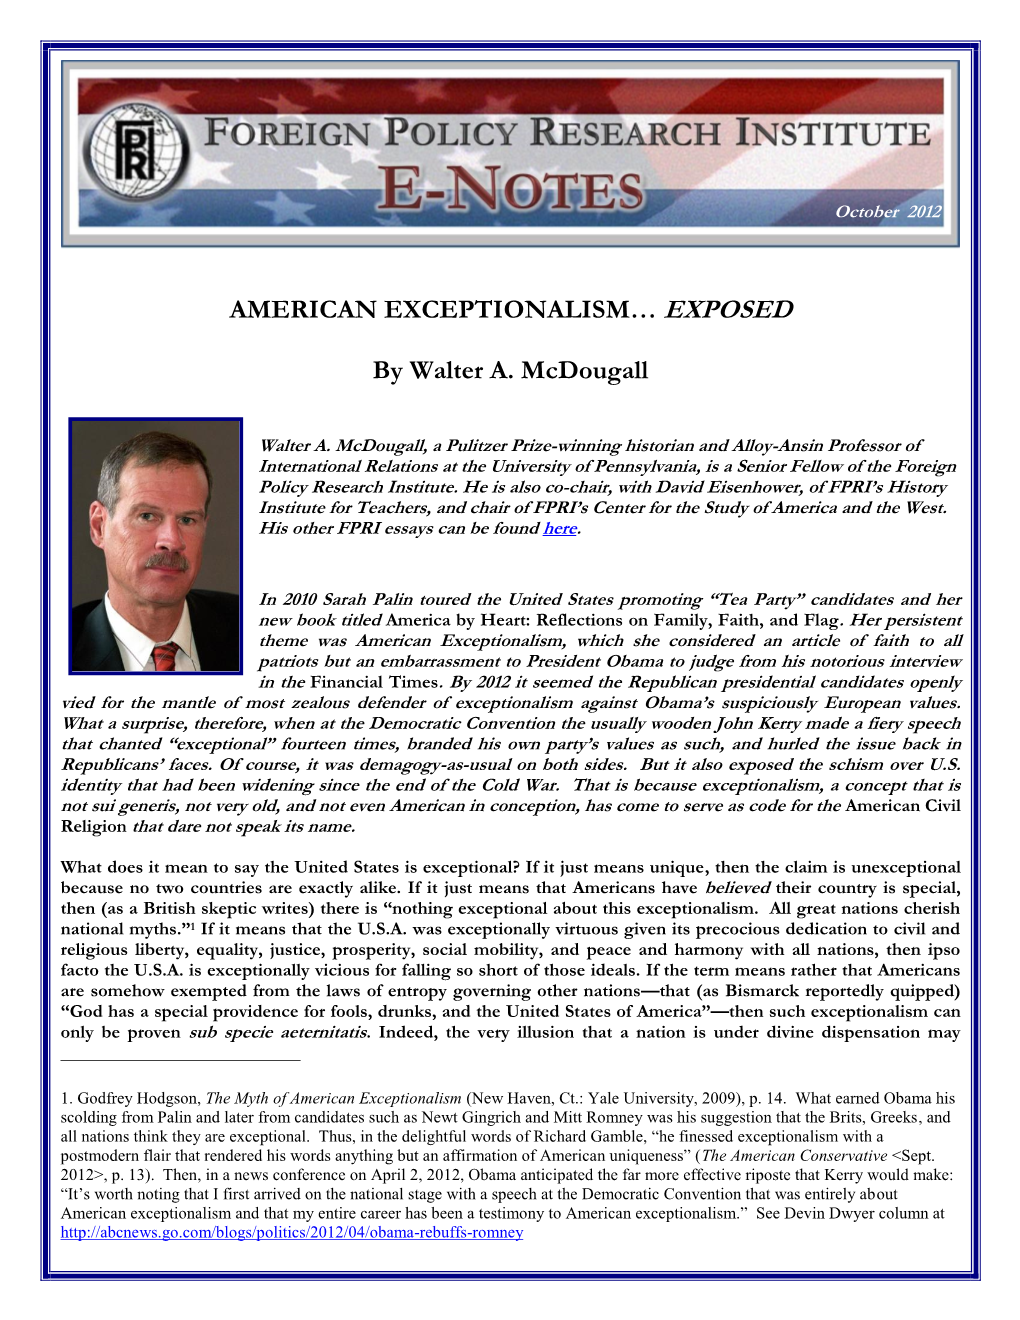 AMERICAN EXCEPTIONALISM… EXPOSED by Walter A. Mcdougall